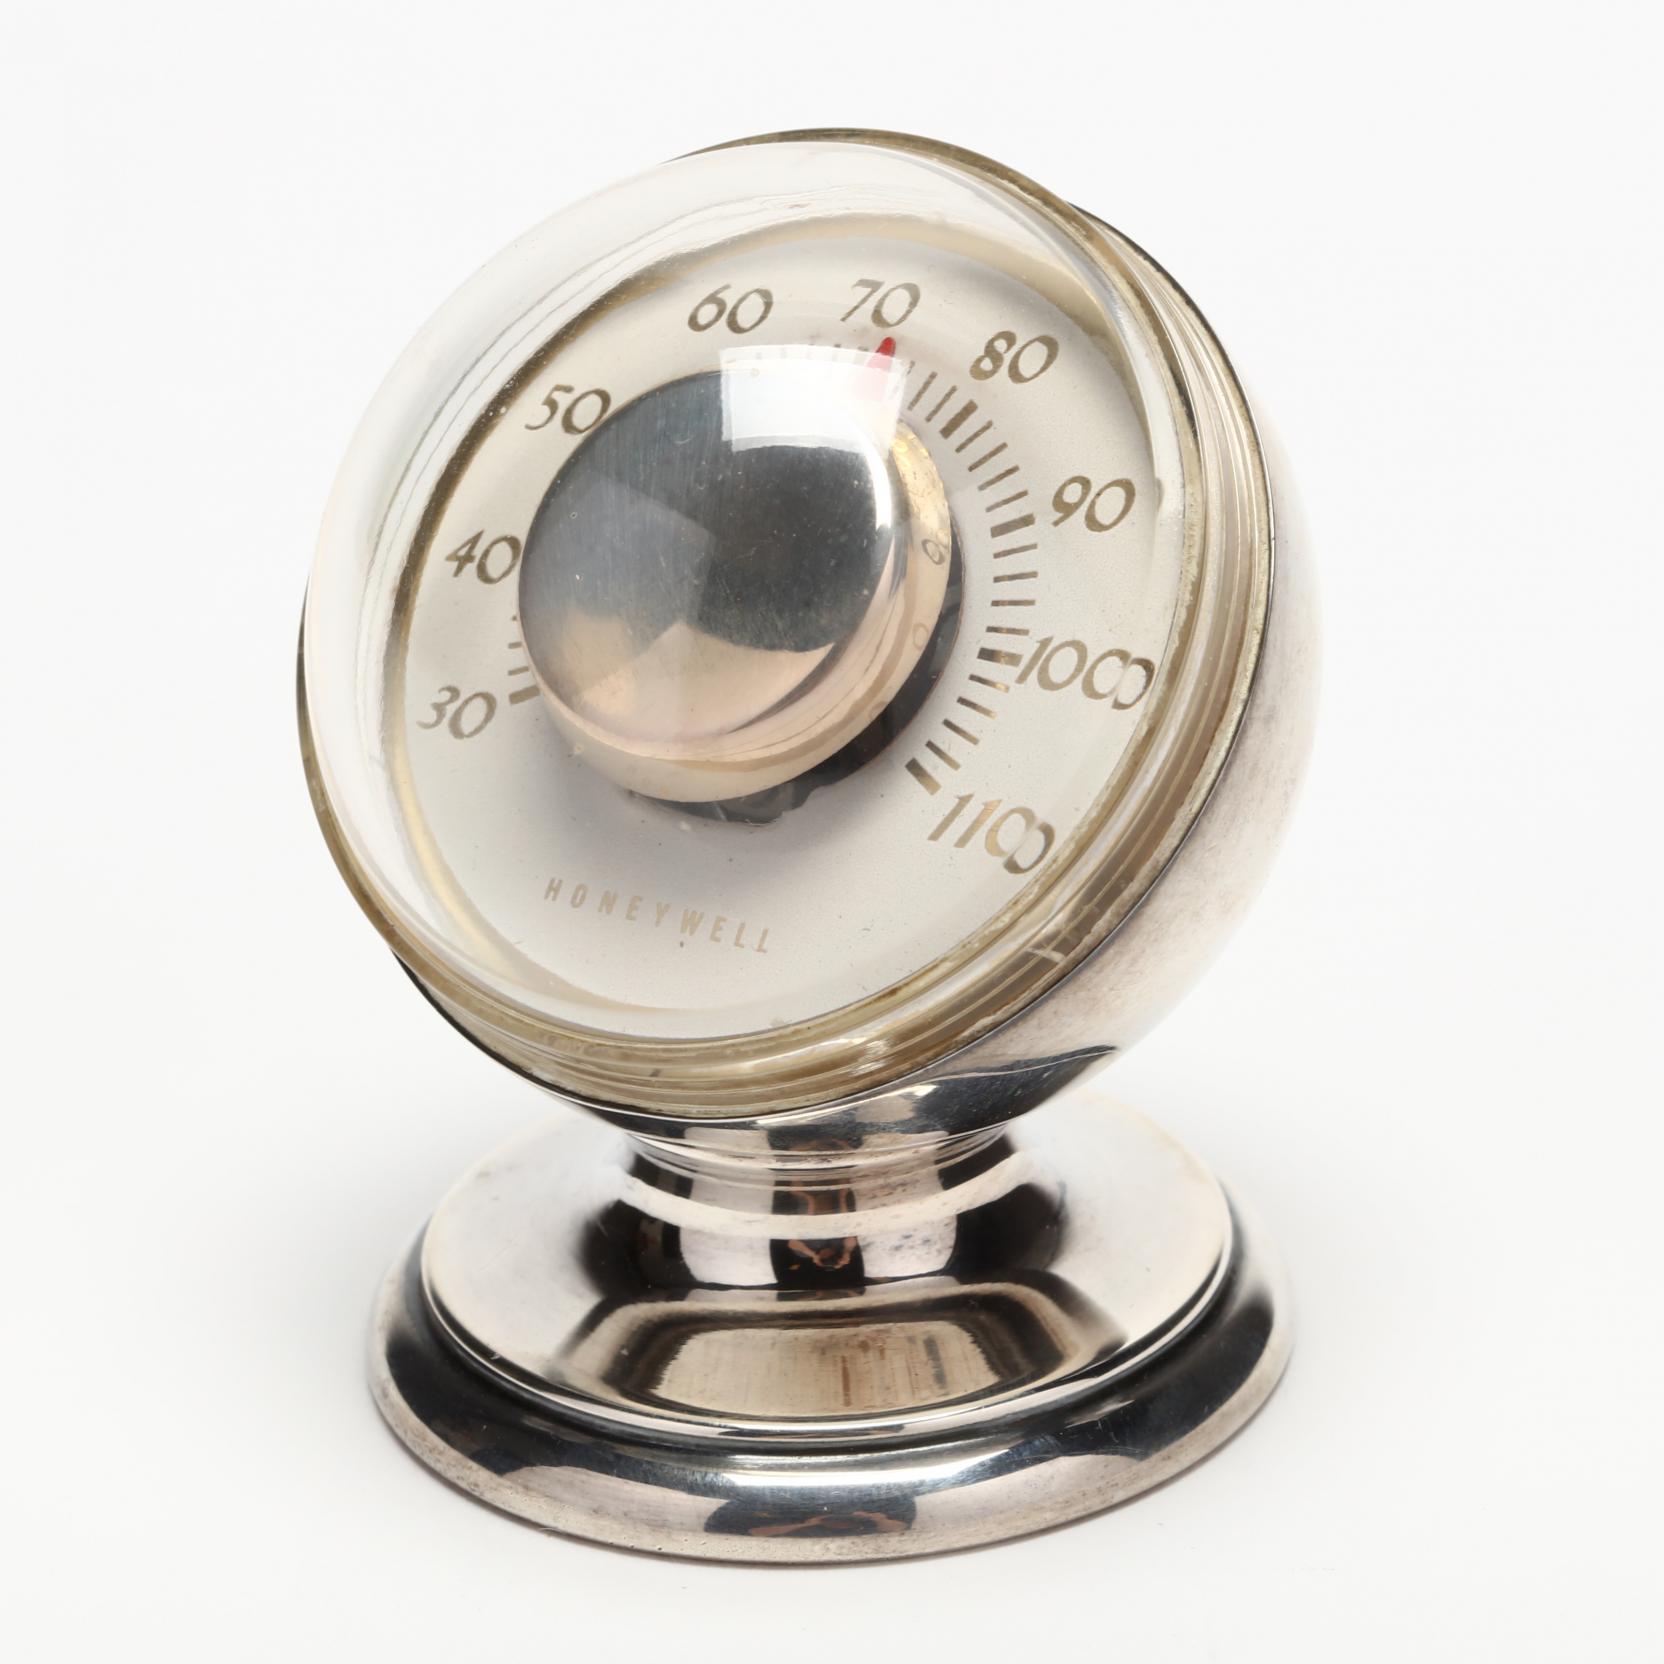 Sold at Auction: Tiffany & Co. Sterling Silver Desktop Thermometer